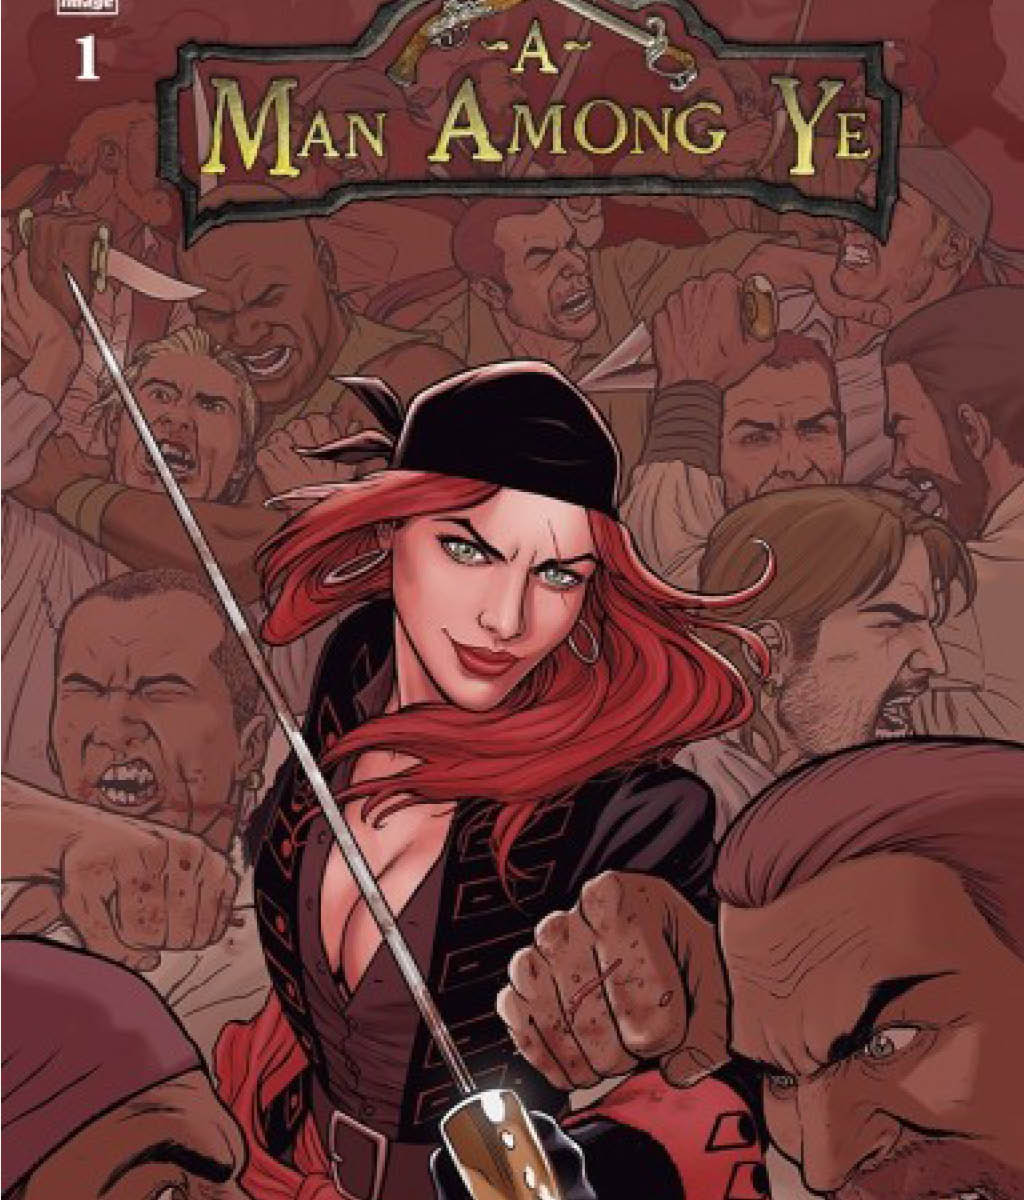 A Man Among Ye Volume 1 by Stephanie Phillips